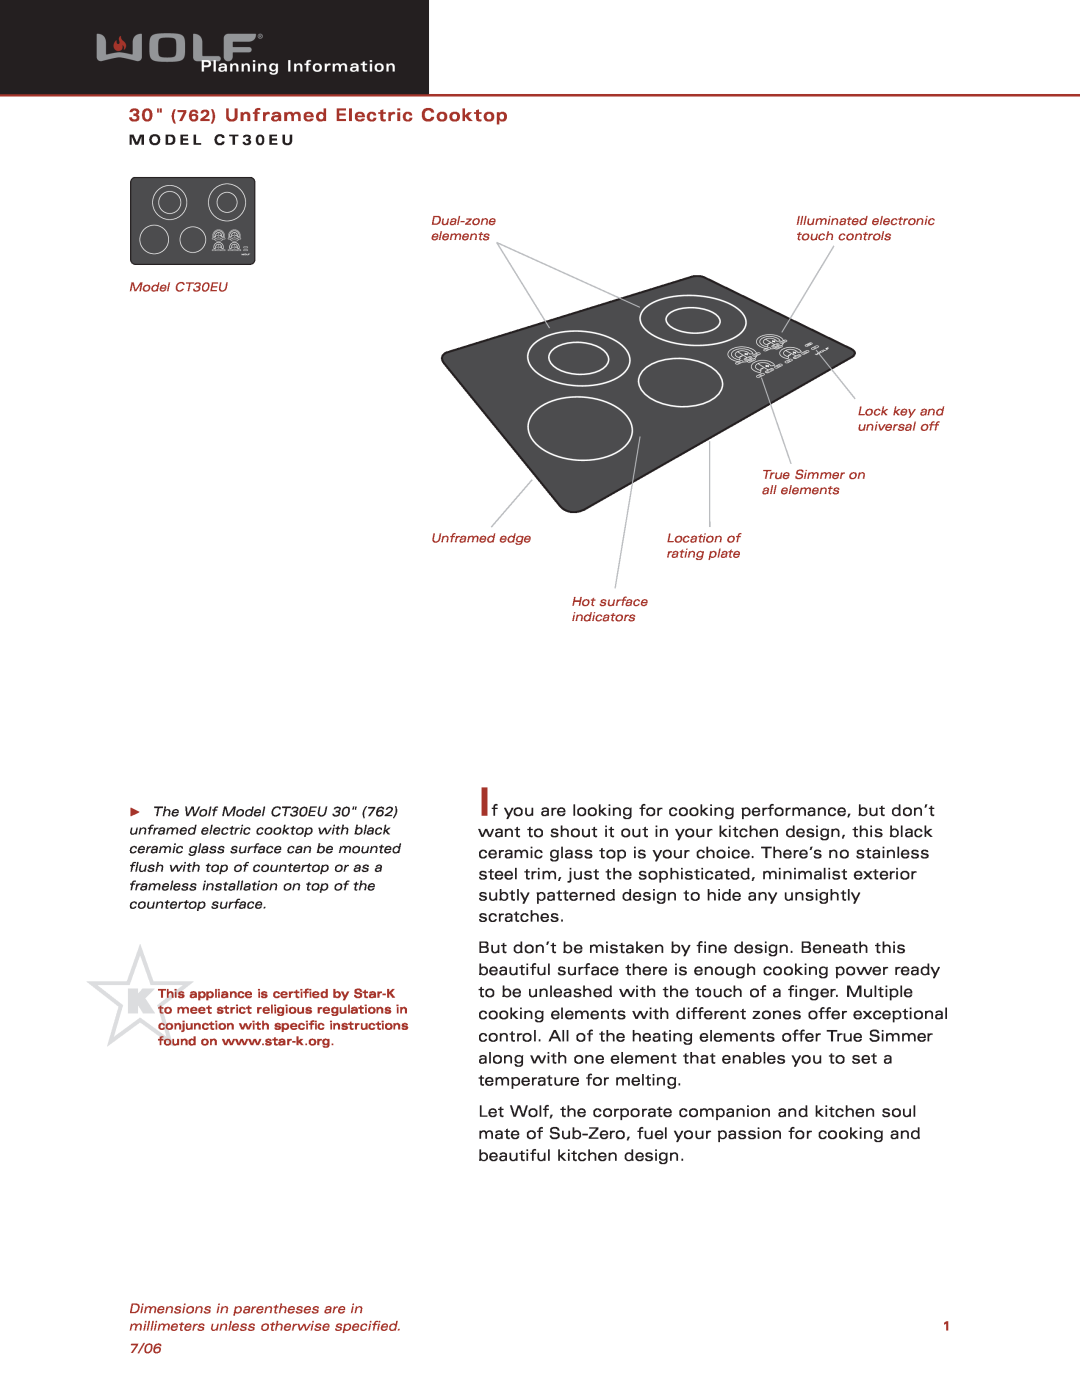 Sub-Zero CT30EU dimensions 30 762 Unframed Electric Cooktop, Planning Information 